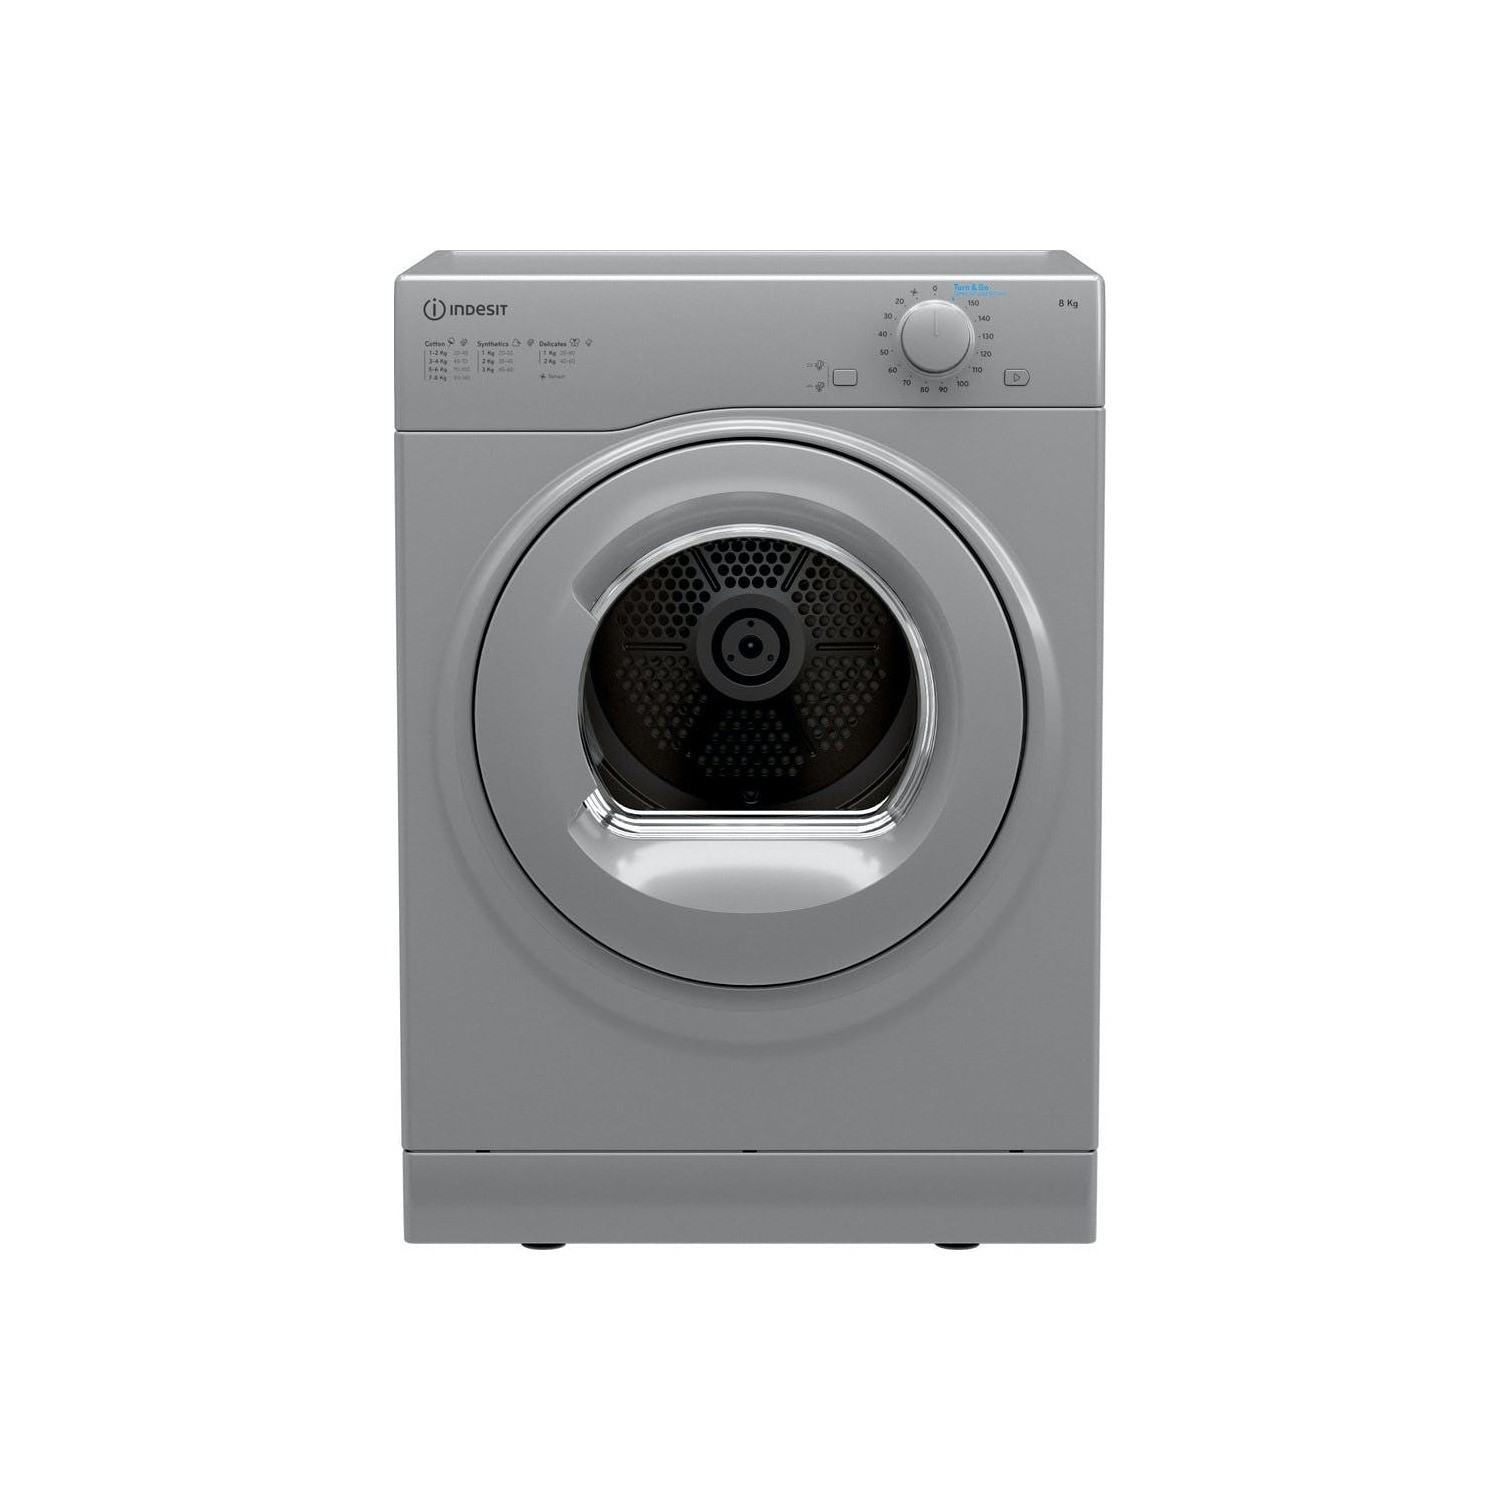 Indesit 8kg Freestanding Vented Tumble Dryer - Silver